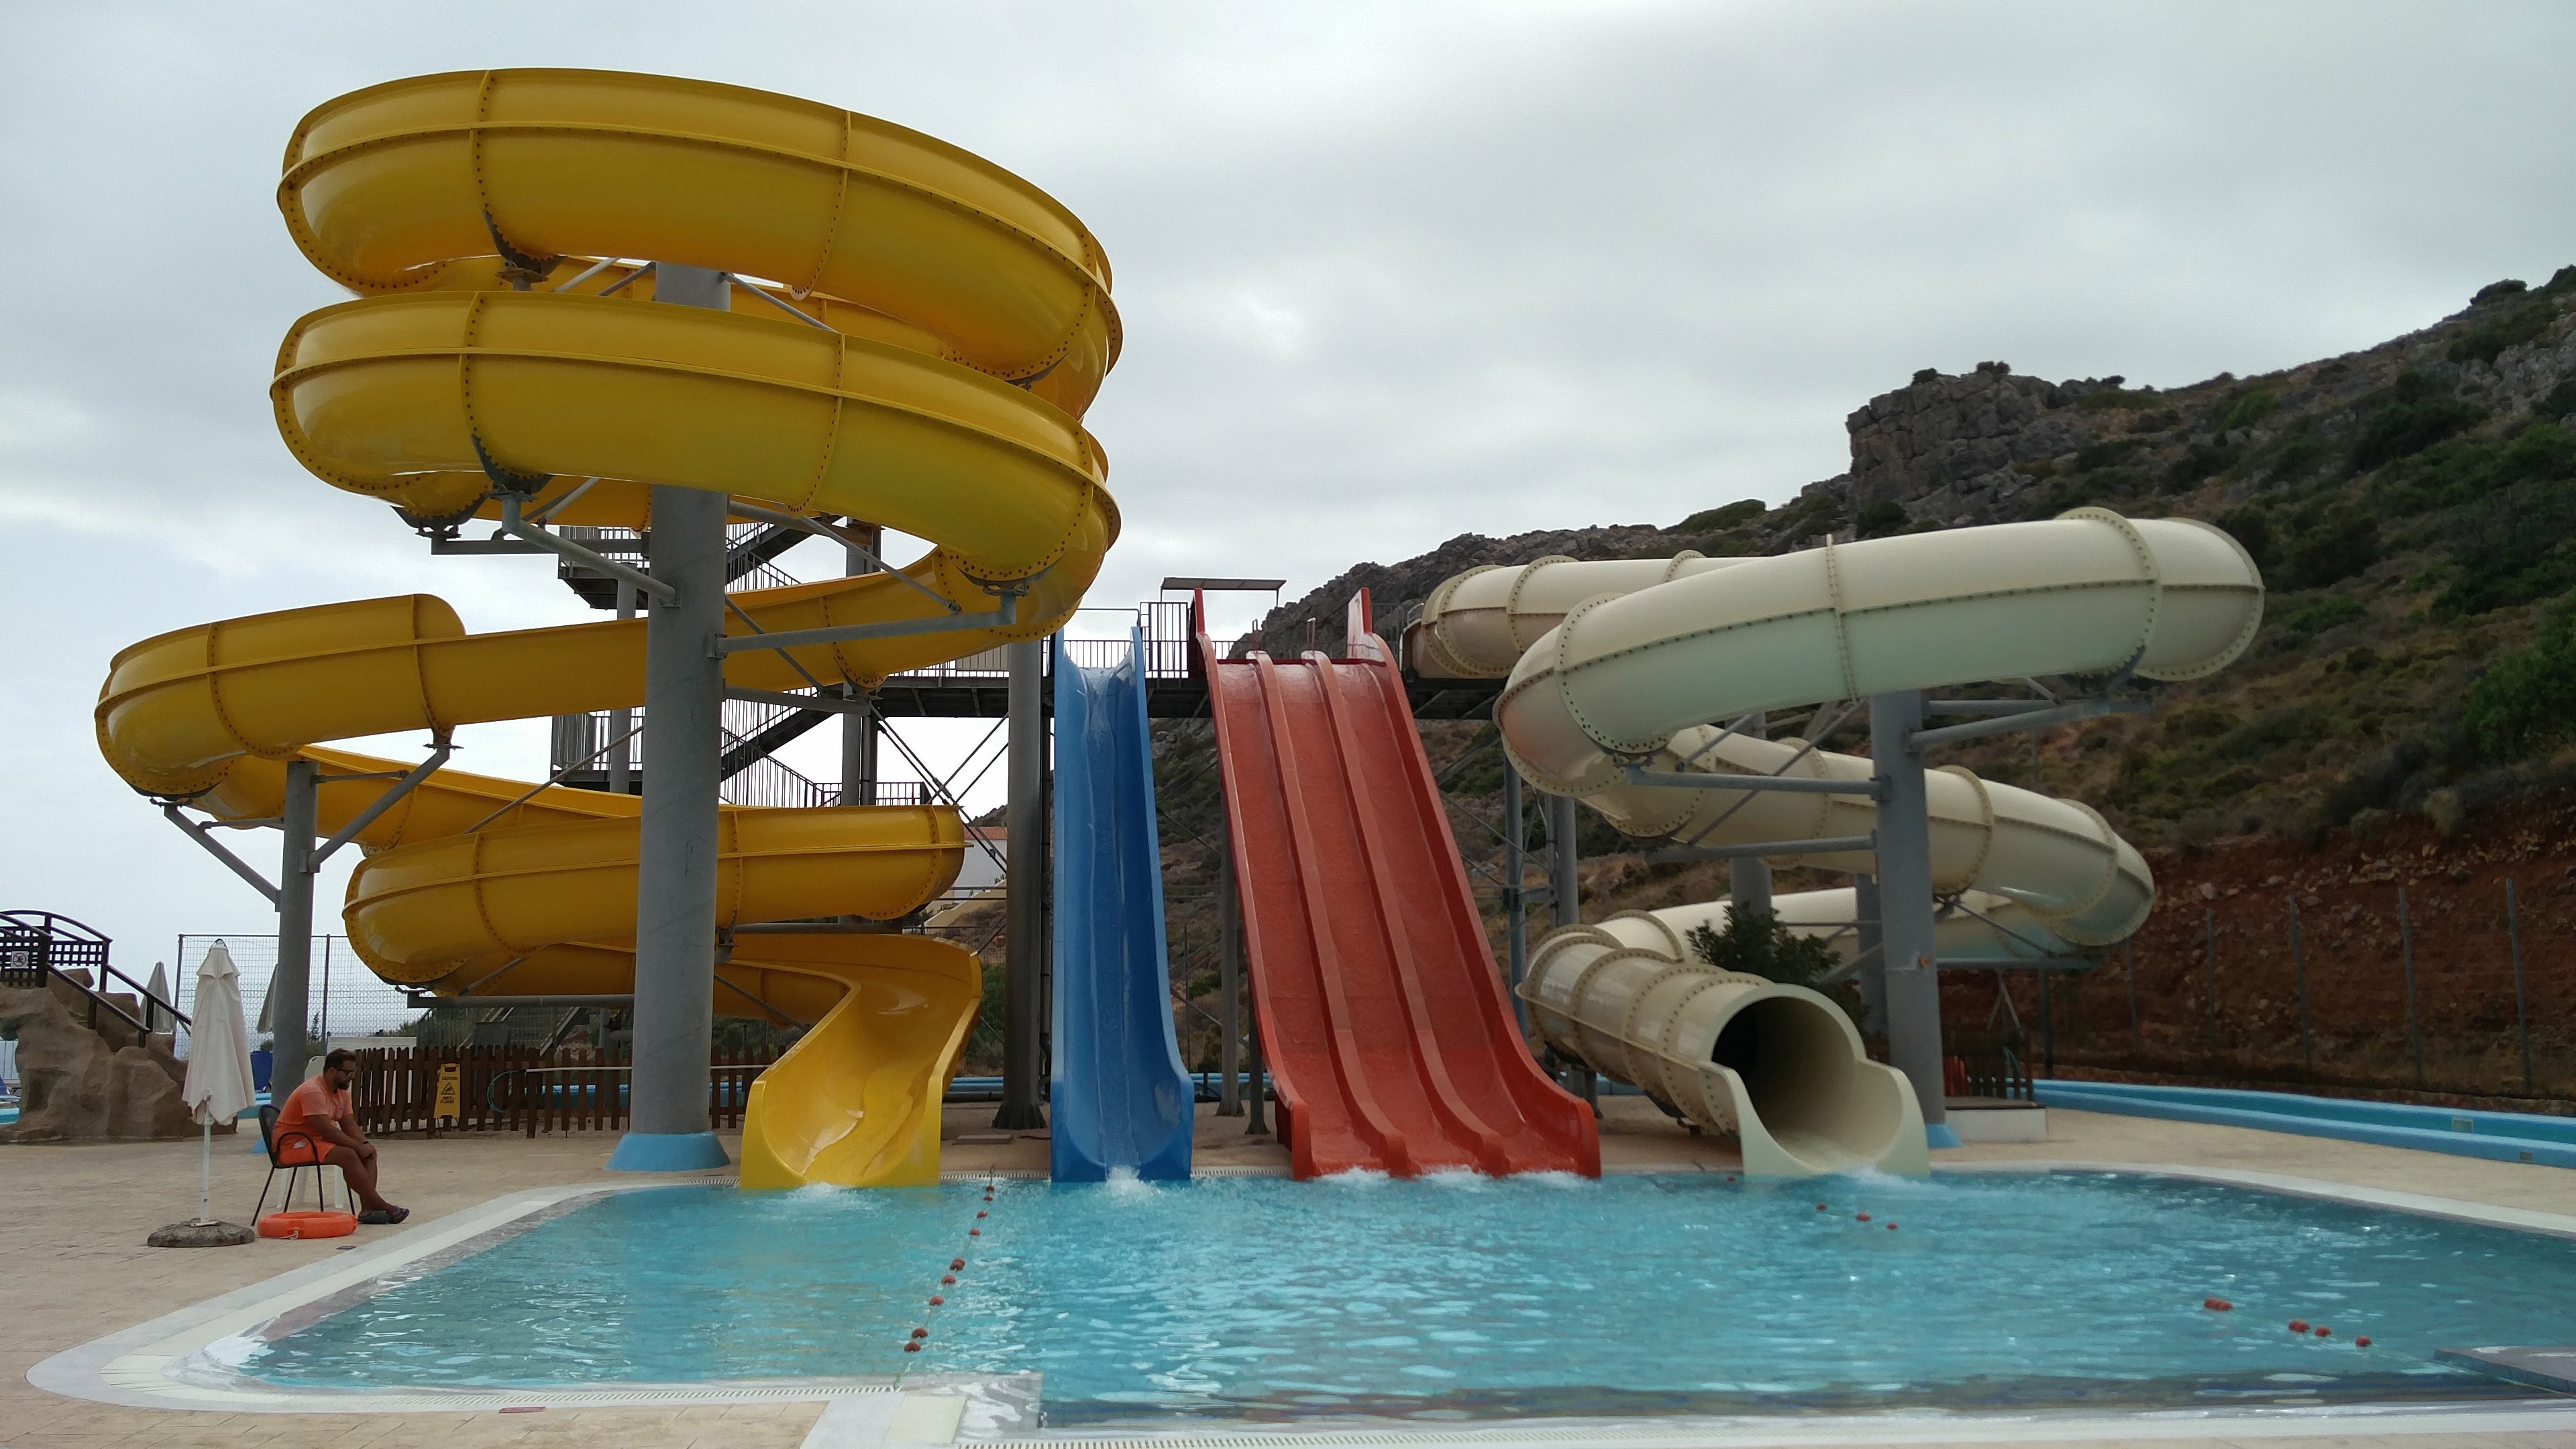 Waterpark: Splash pads, Spraygrounds, Lazy rivers, Barefooting environments. 3840x2160 4K Background.